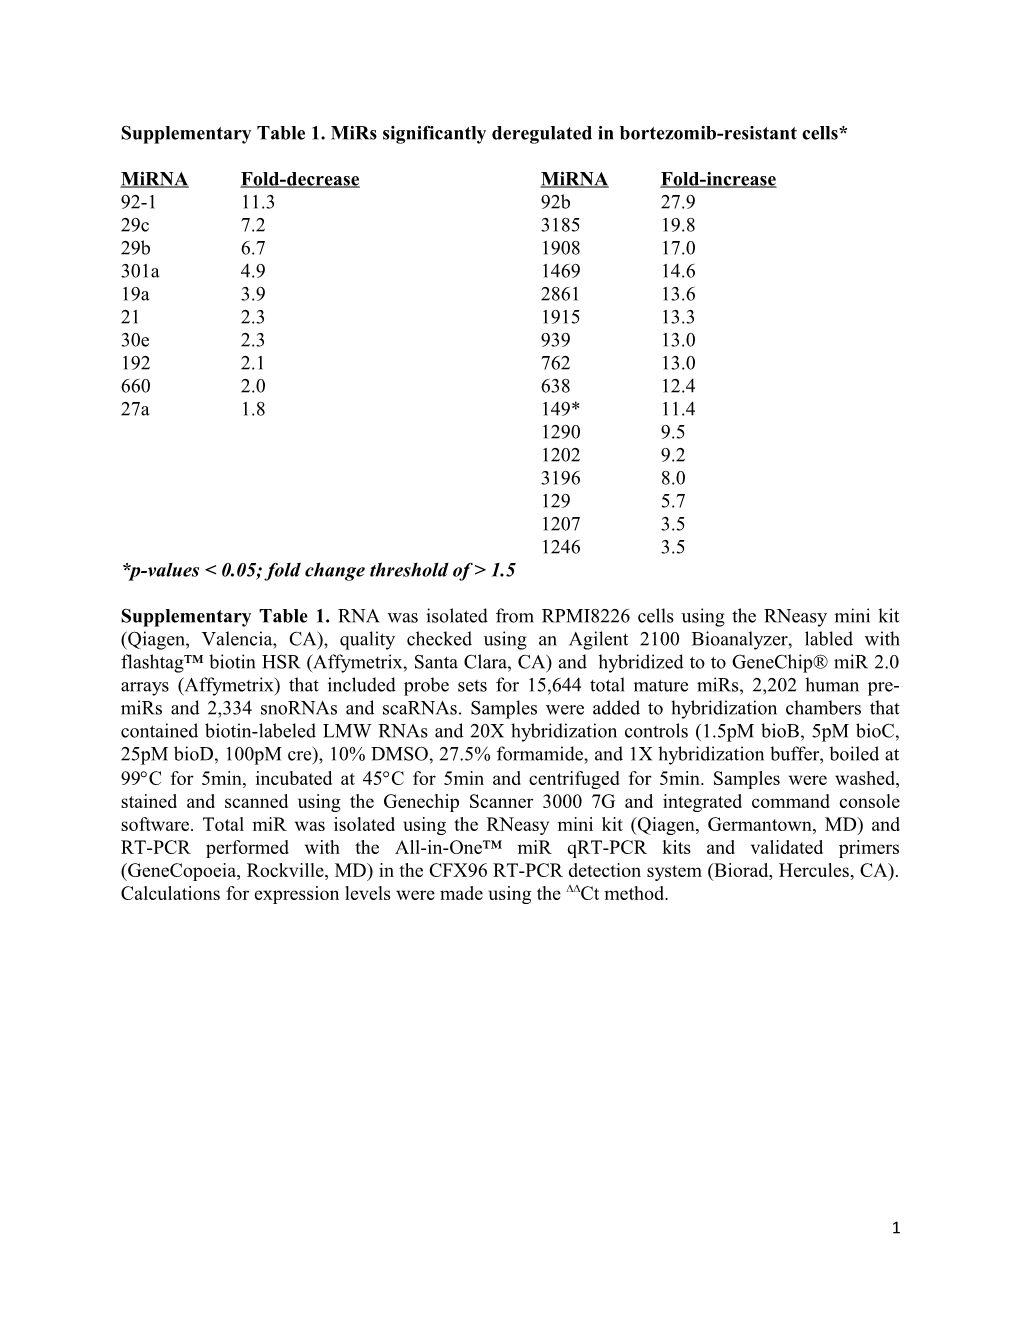 Supplementary Table 1. Mirs Significantly Deregulated in Bortezomib-Resistant Cells*